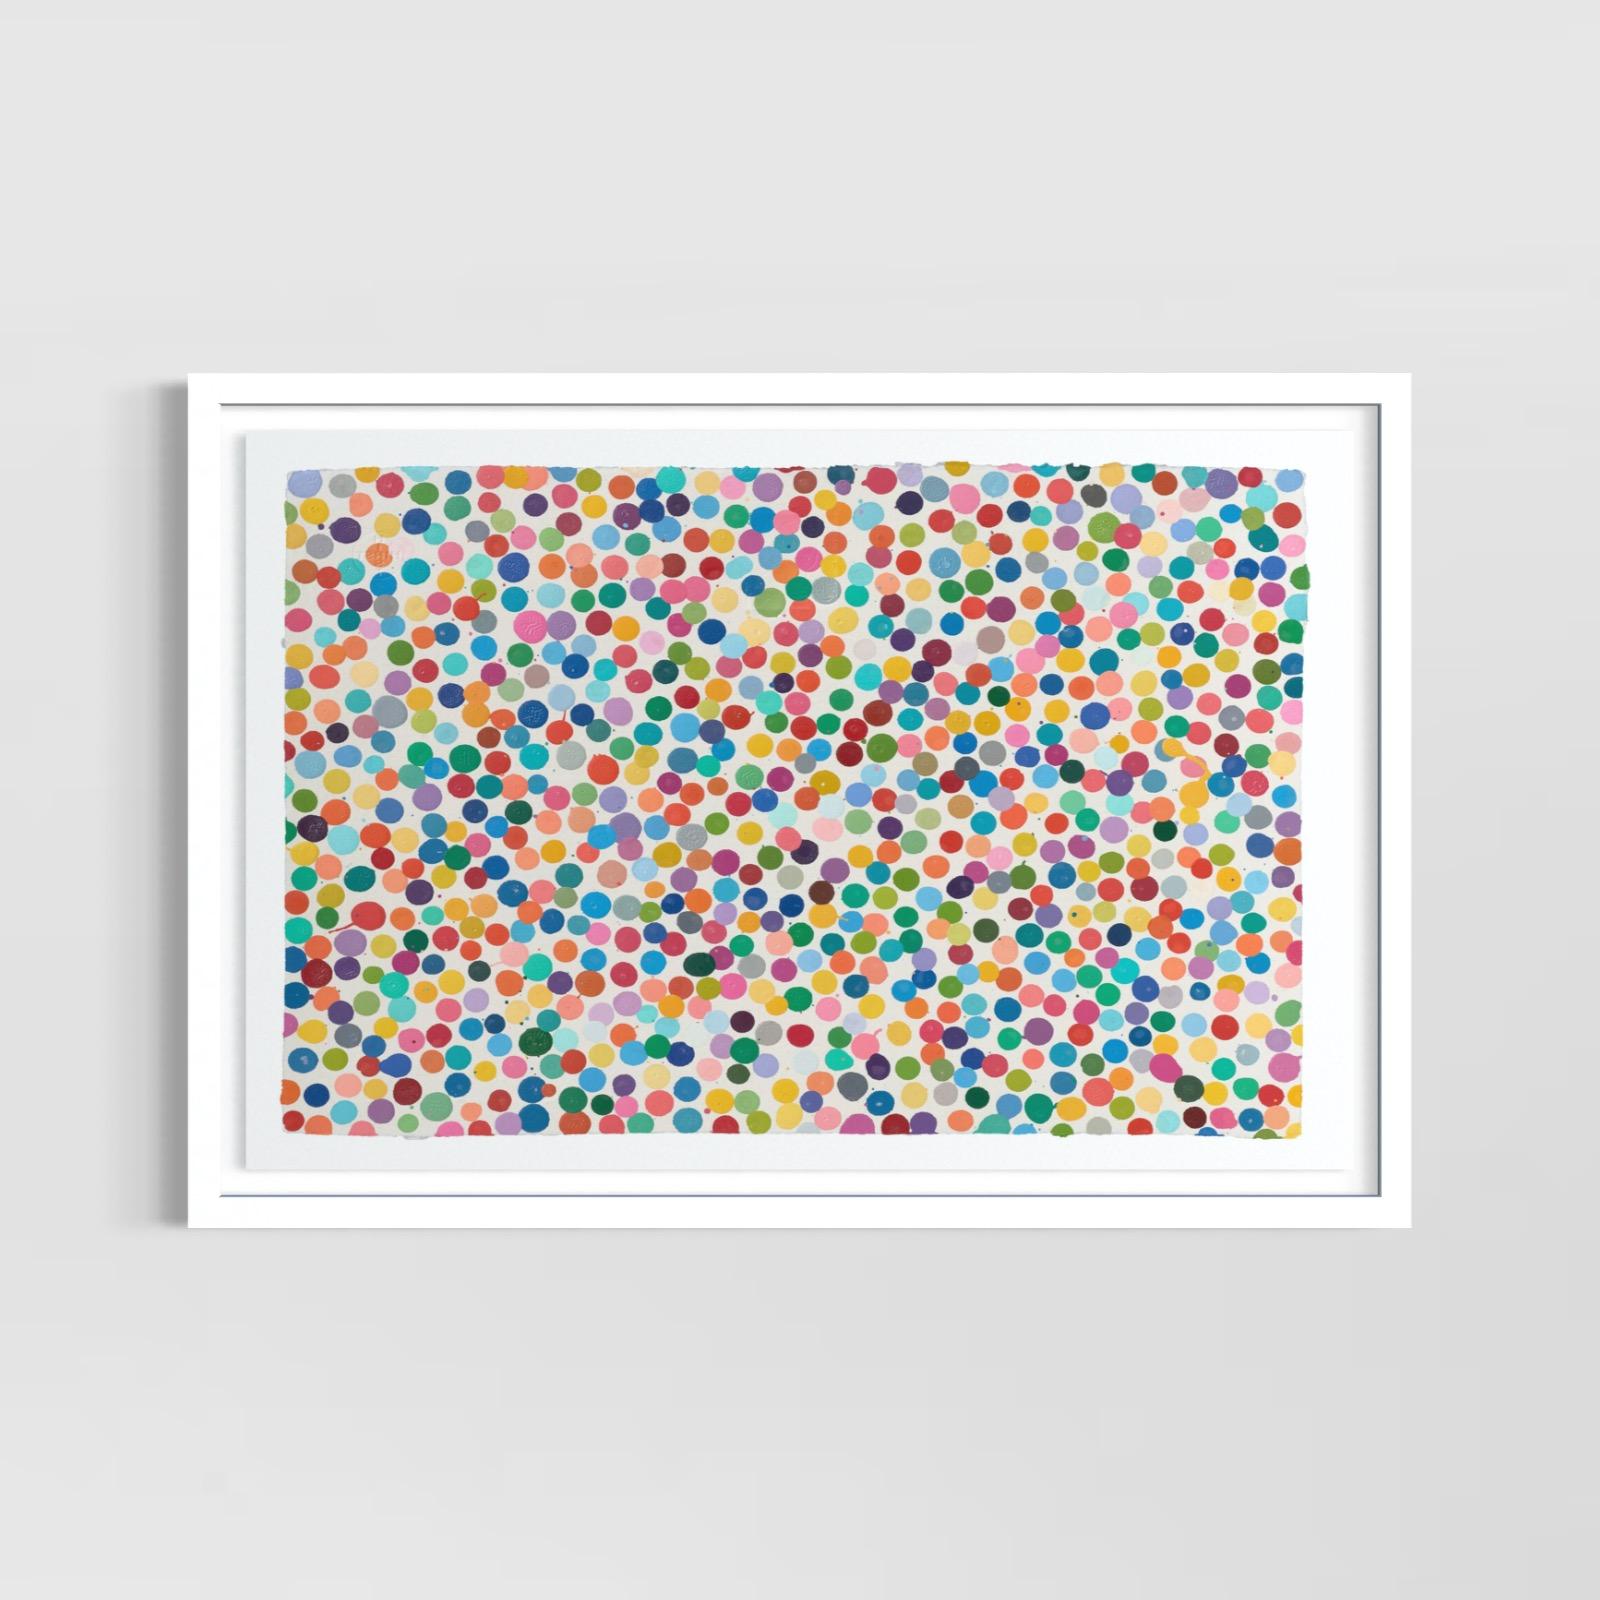 Damien Hirst Abstract Print - 4548. Jealousy like a girl (The Currency) 2016-2021, Enamel paint 